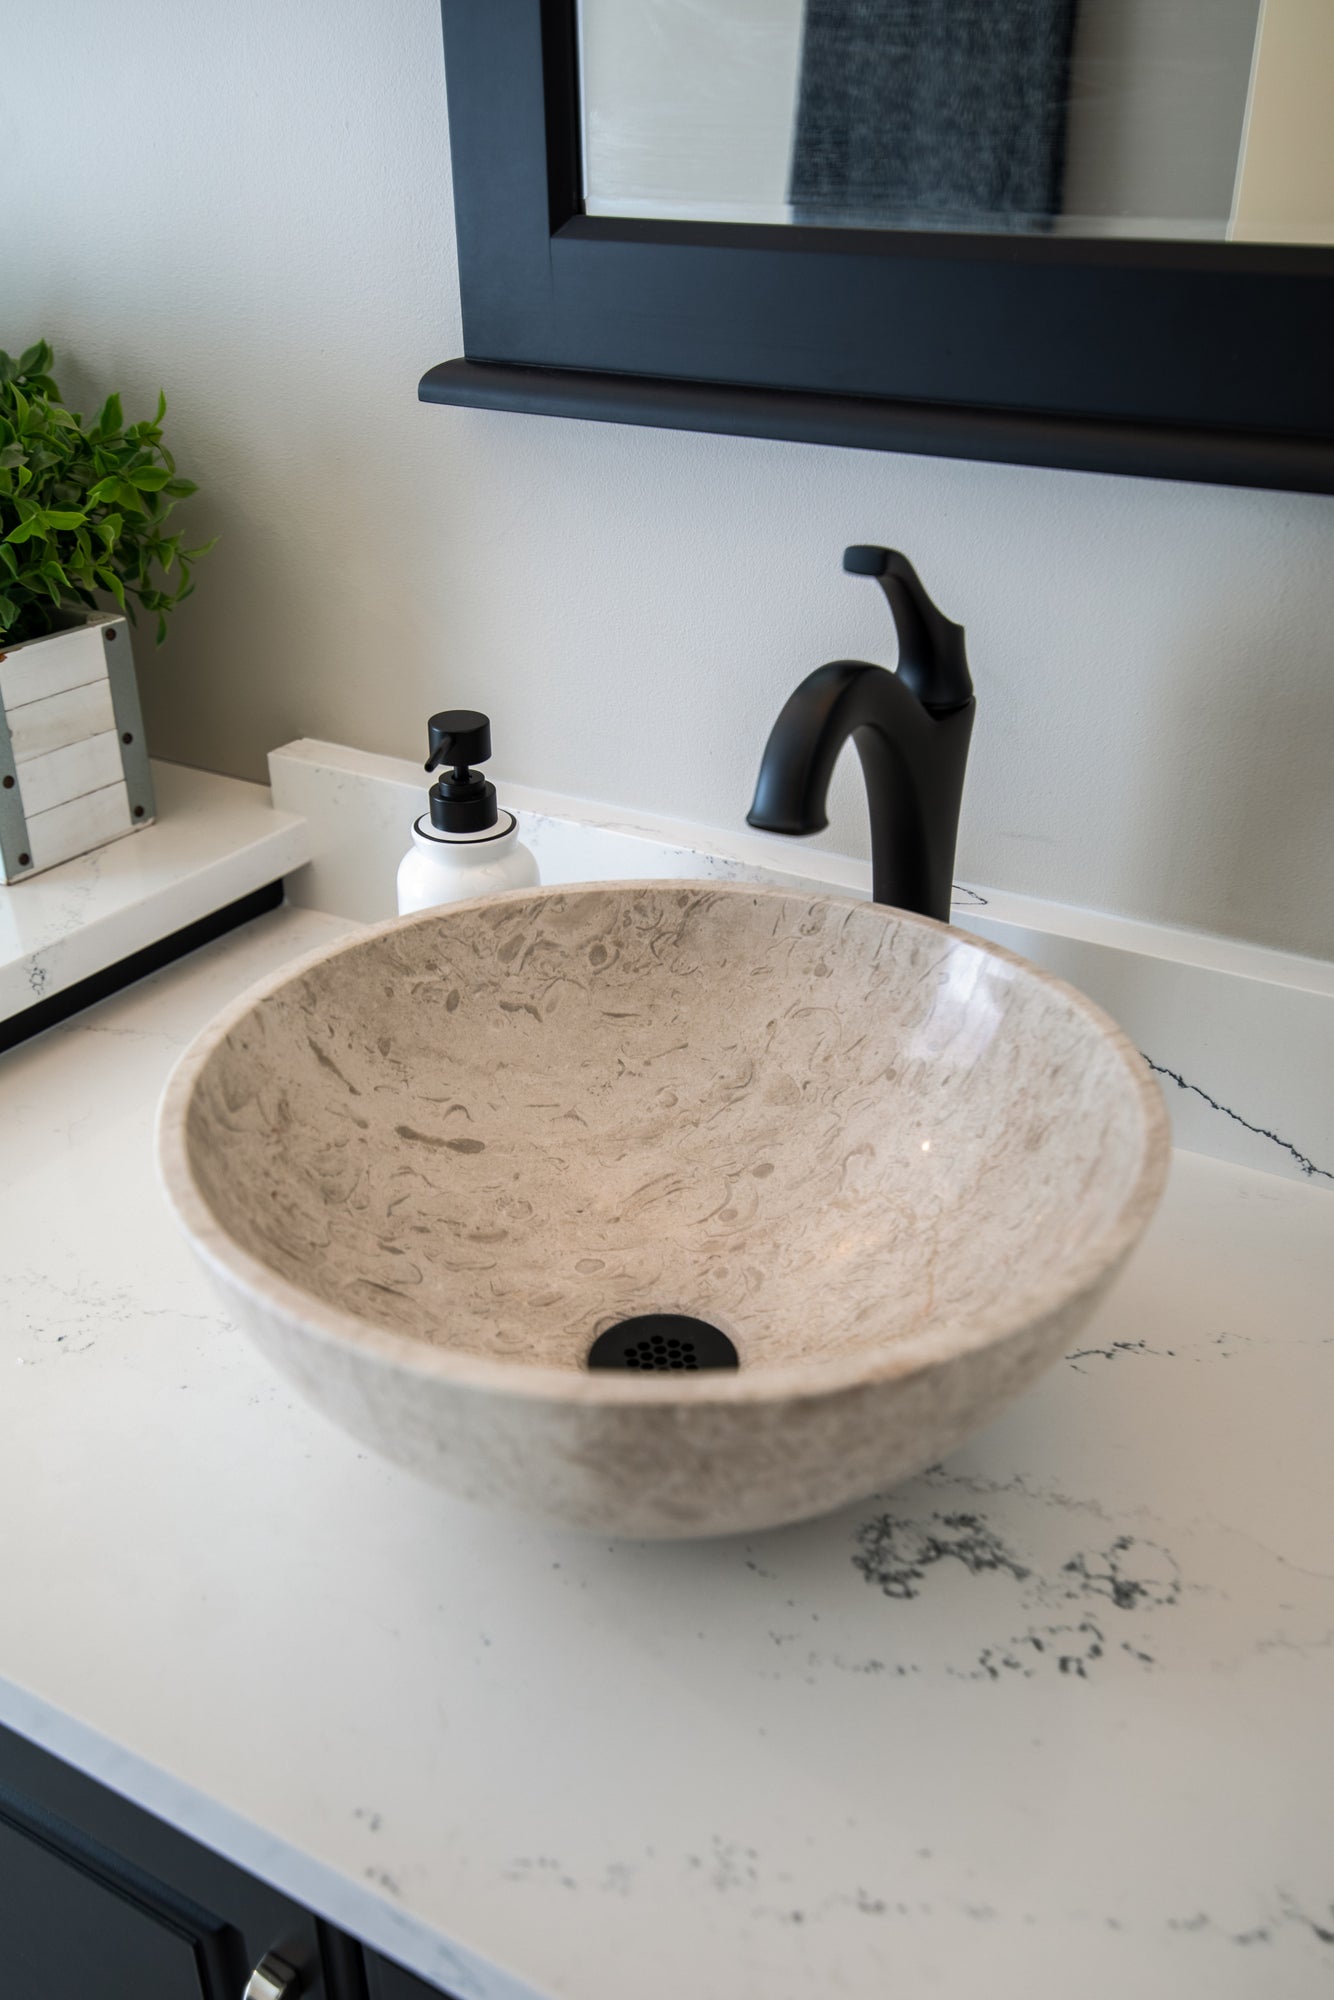 Small 14" Vessel Sink Bowl - Polished Penny Grey Marble